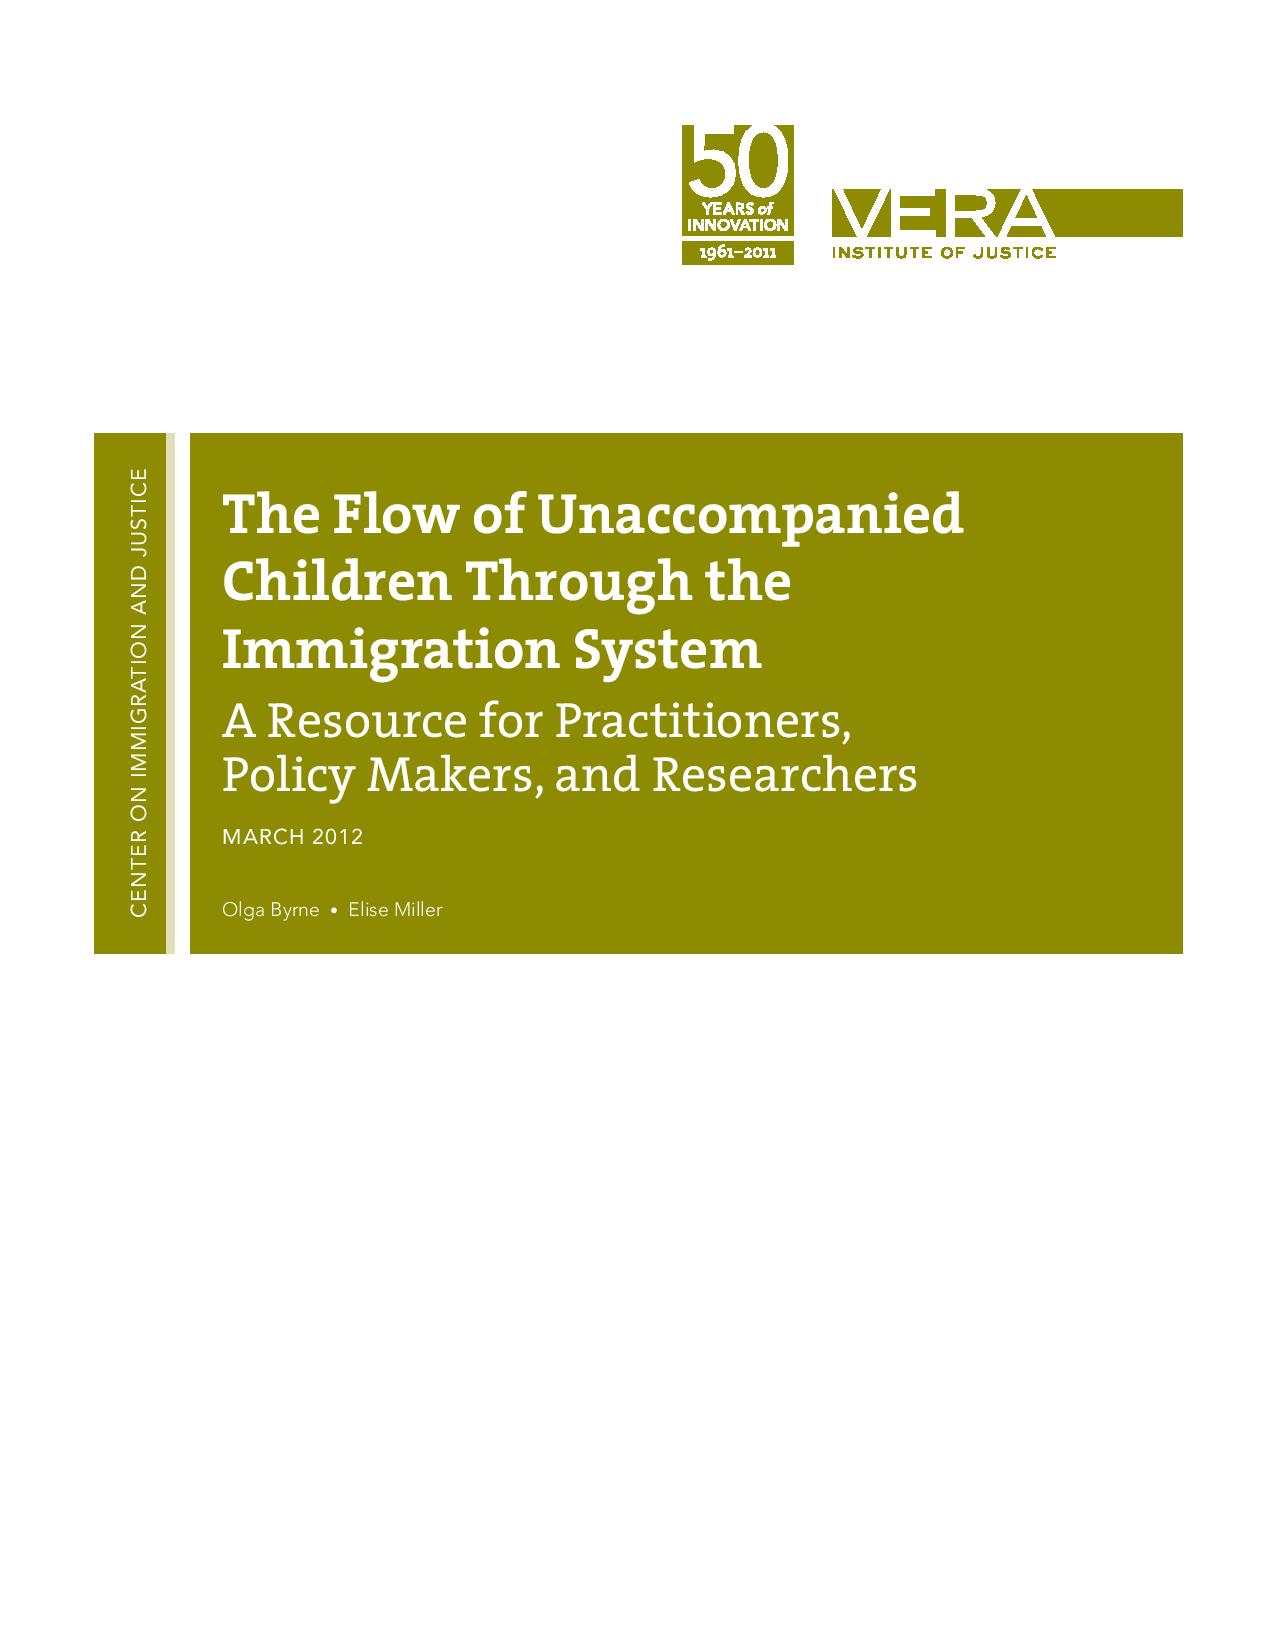 the-flow-of-unaccompanied-children-through-the-immigration-system.pdf copy-page-001